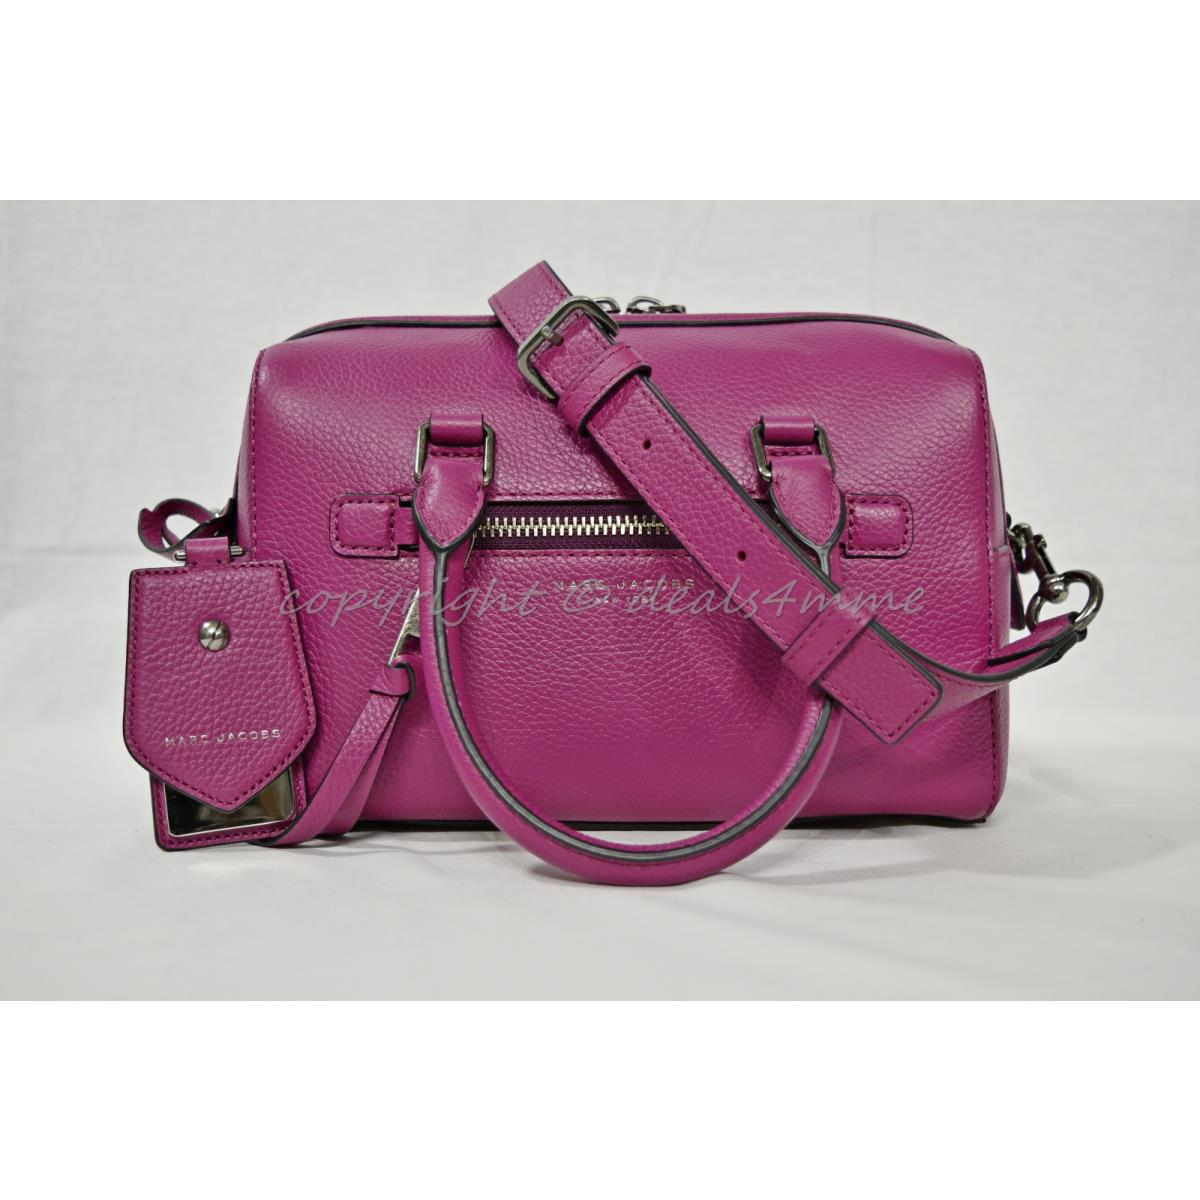 Marc By Marc Jacobs Recruit Small Bauletto Satchel Wallets in Wild Berry Recruit Small Bauletto Satchel - Wild Berry